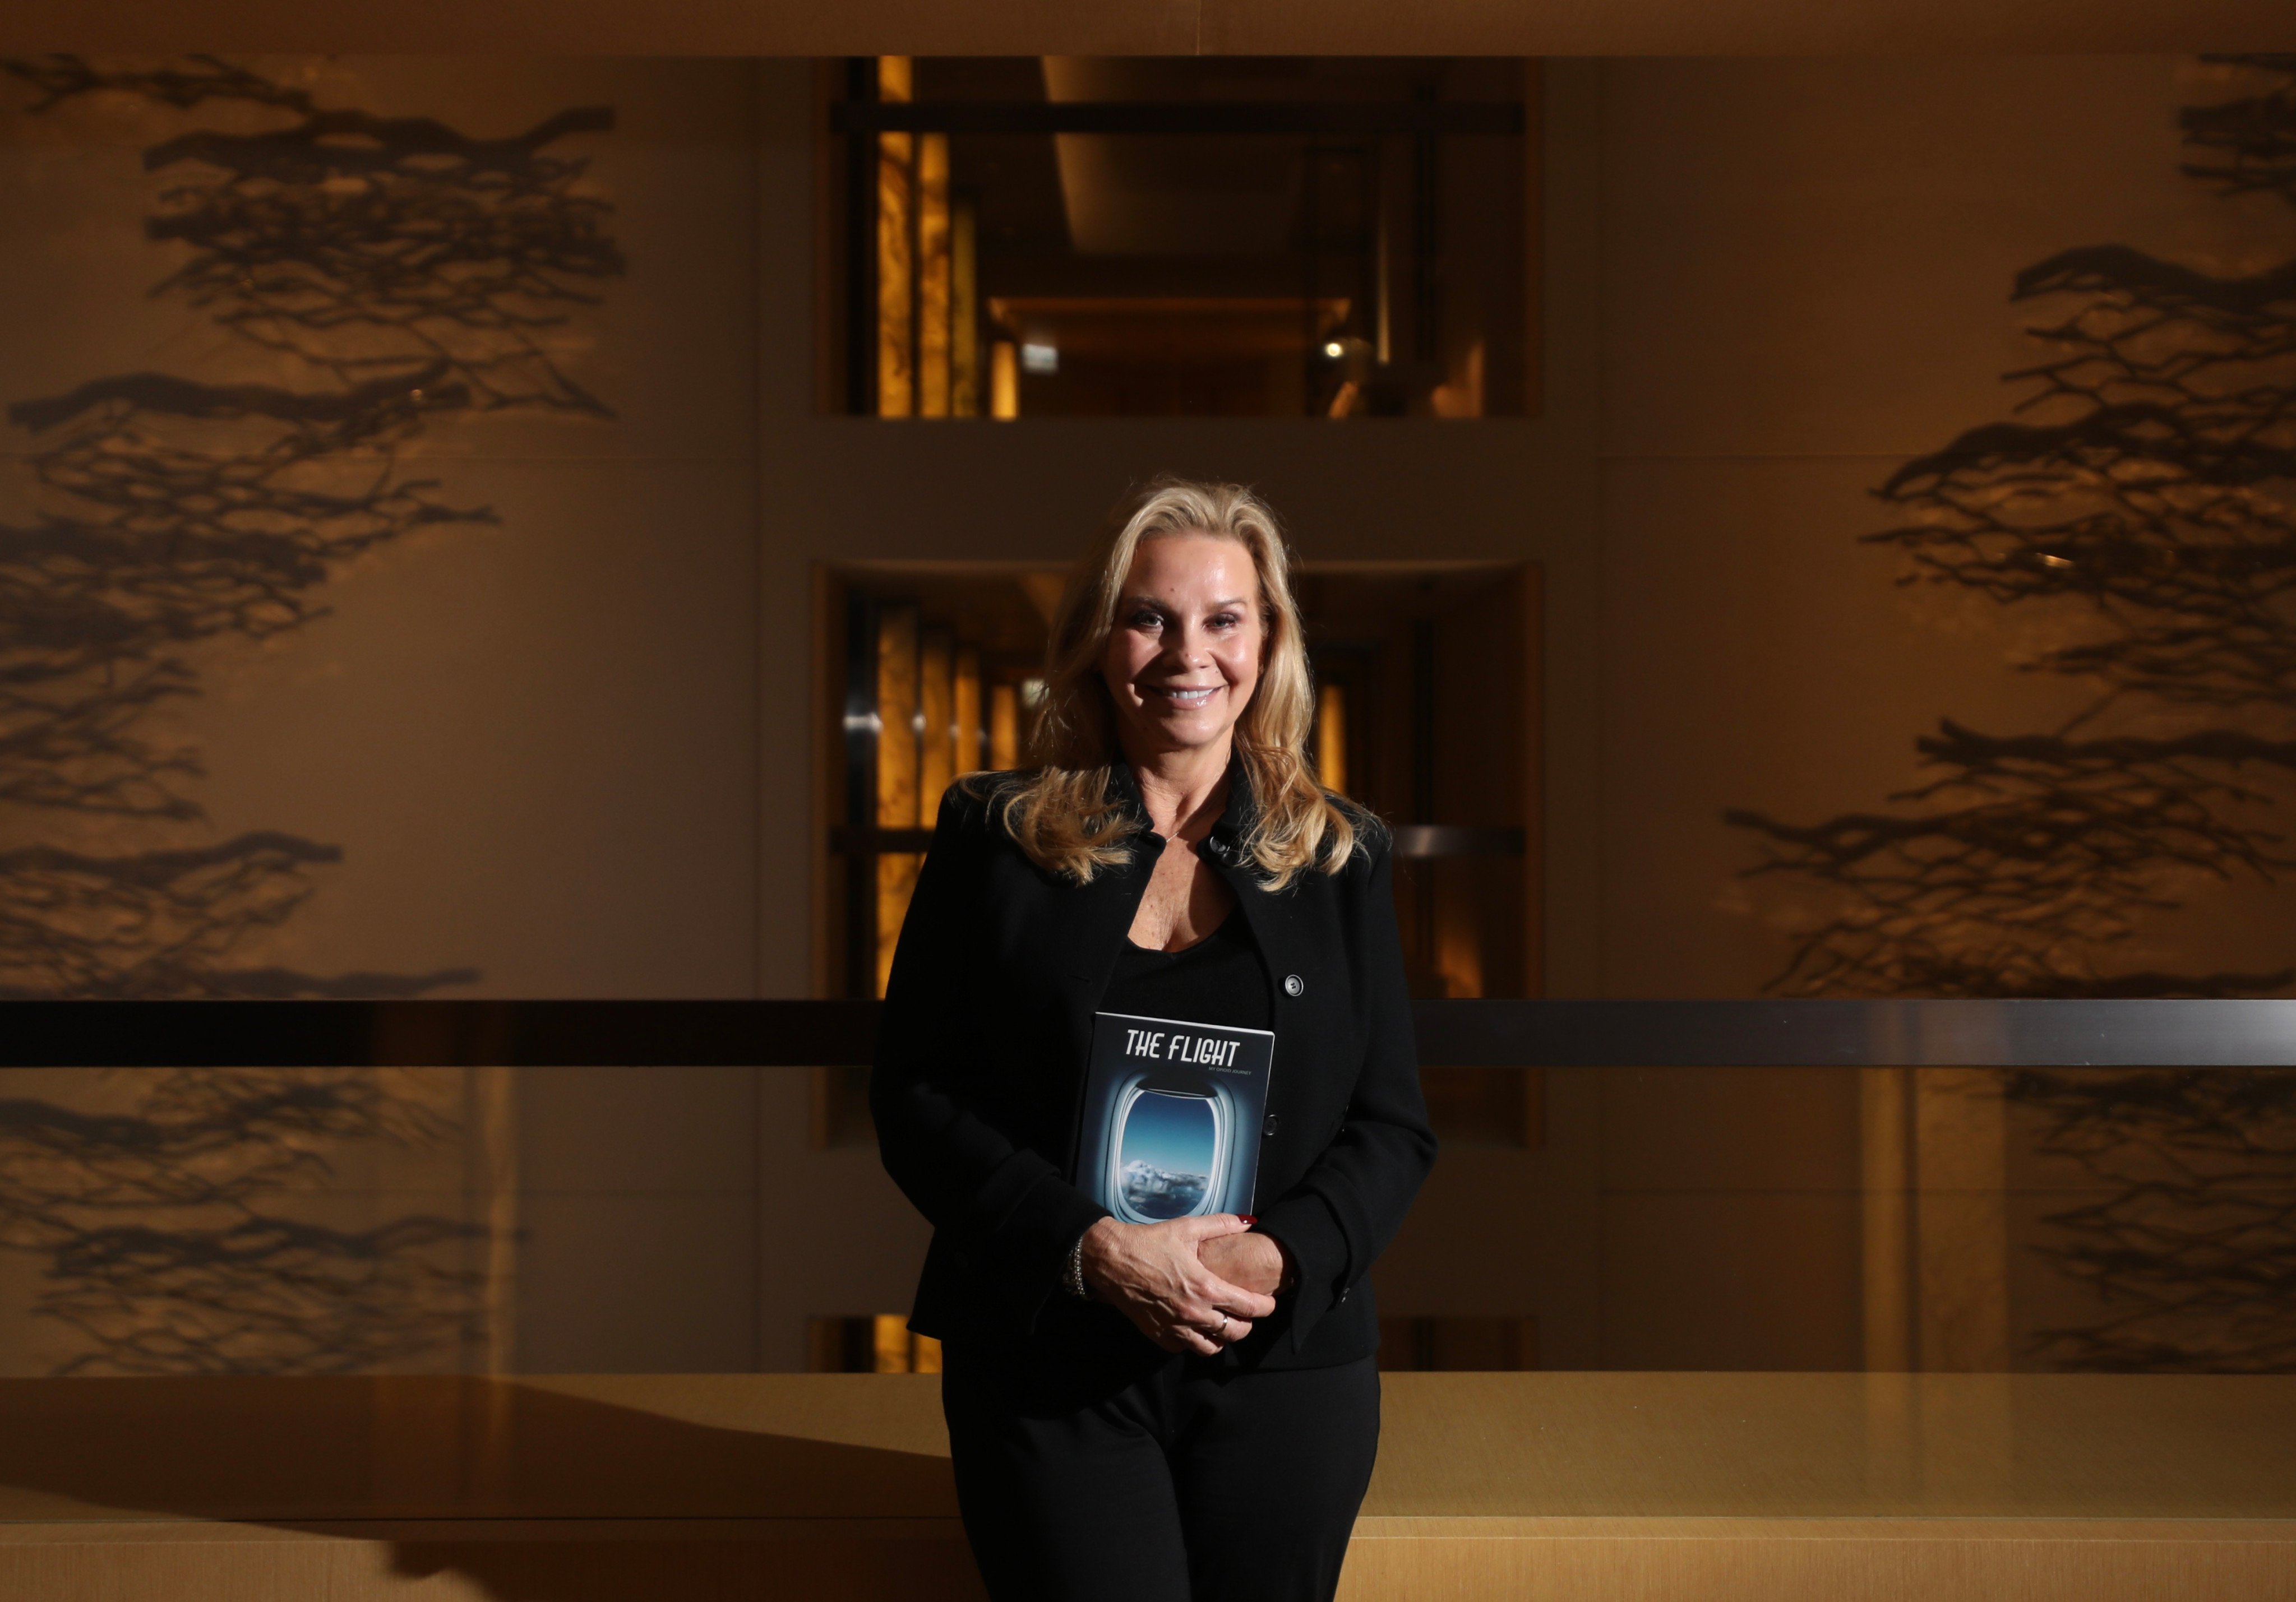 When her son died of a drug overdose after becoming addicted to opioid painkillers prescribed him after surgery, Cammie Wolf Rice began speaking out about the risks of opioid use. She was in Hong Kong to talk about her new book, “The Flight: My Opioid Journey”. Photo: Xiaomei Chen